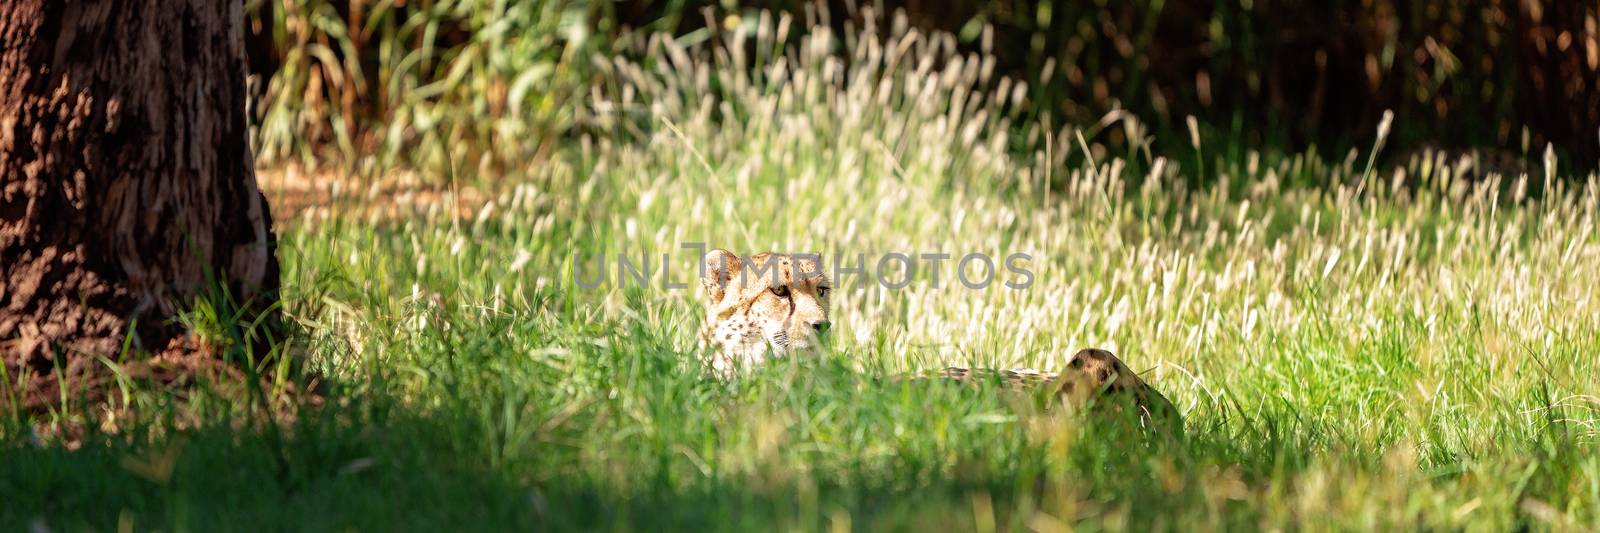 A Cheetah Hiding In The Grass by 	JacksonStock